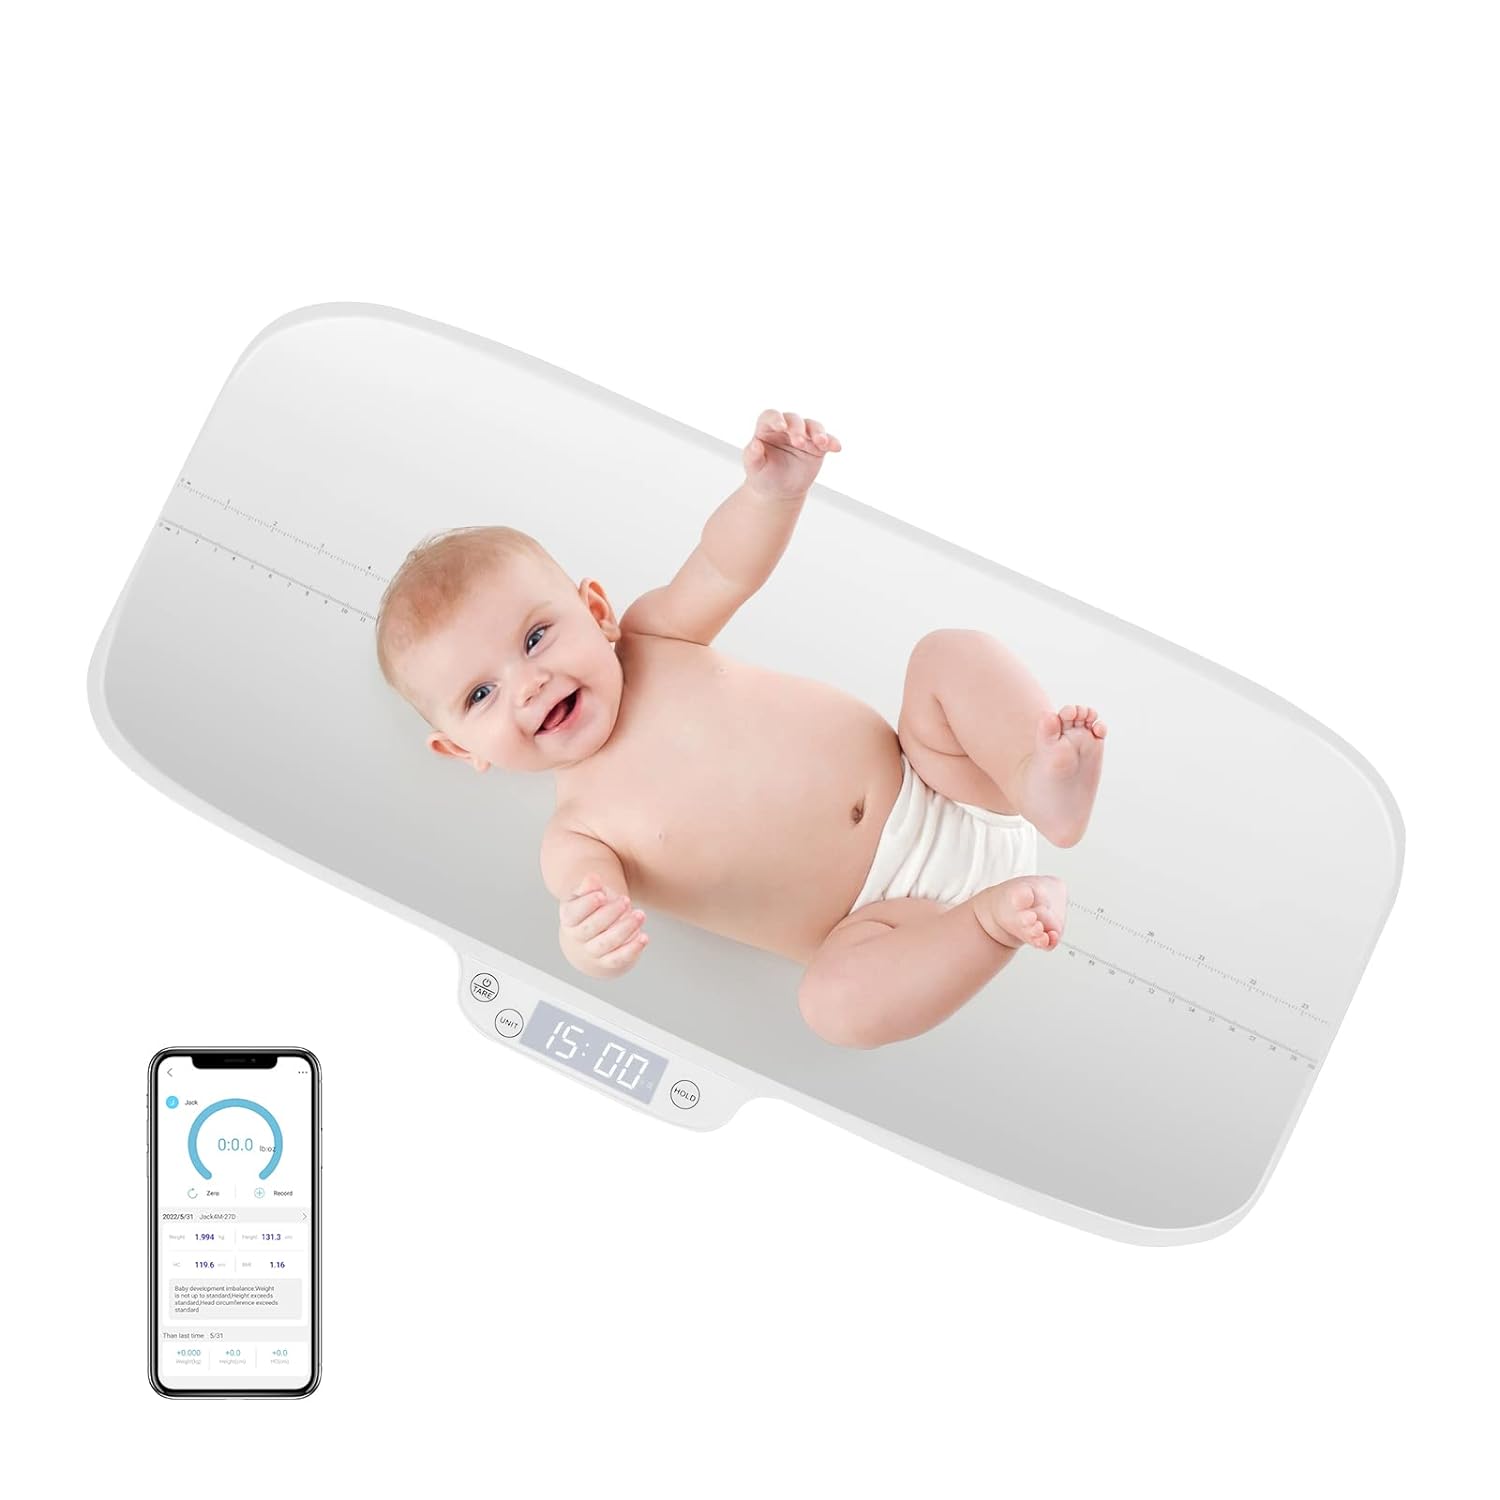 BABY JOY Baby Scale, Multifunctional Pet Scale with Digital LED Display, 4 Weighing Modes, Curved Tray, Rubber Feet, Weighing Scale for Newborn, Animals, High Precision at 0.1oz, Max Weight 66lbs